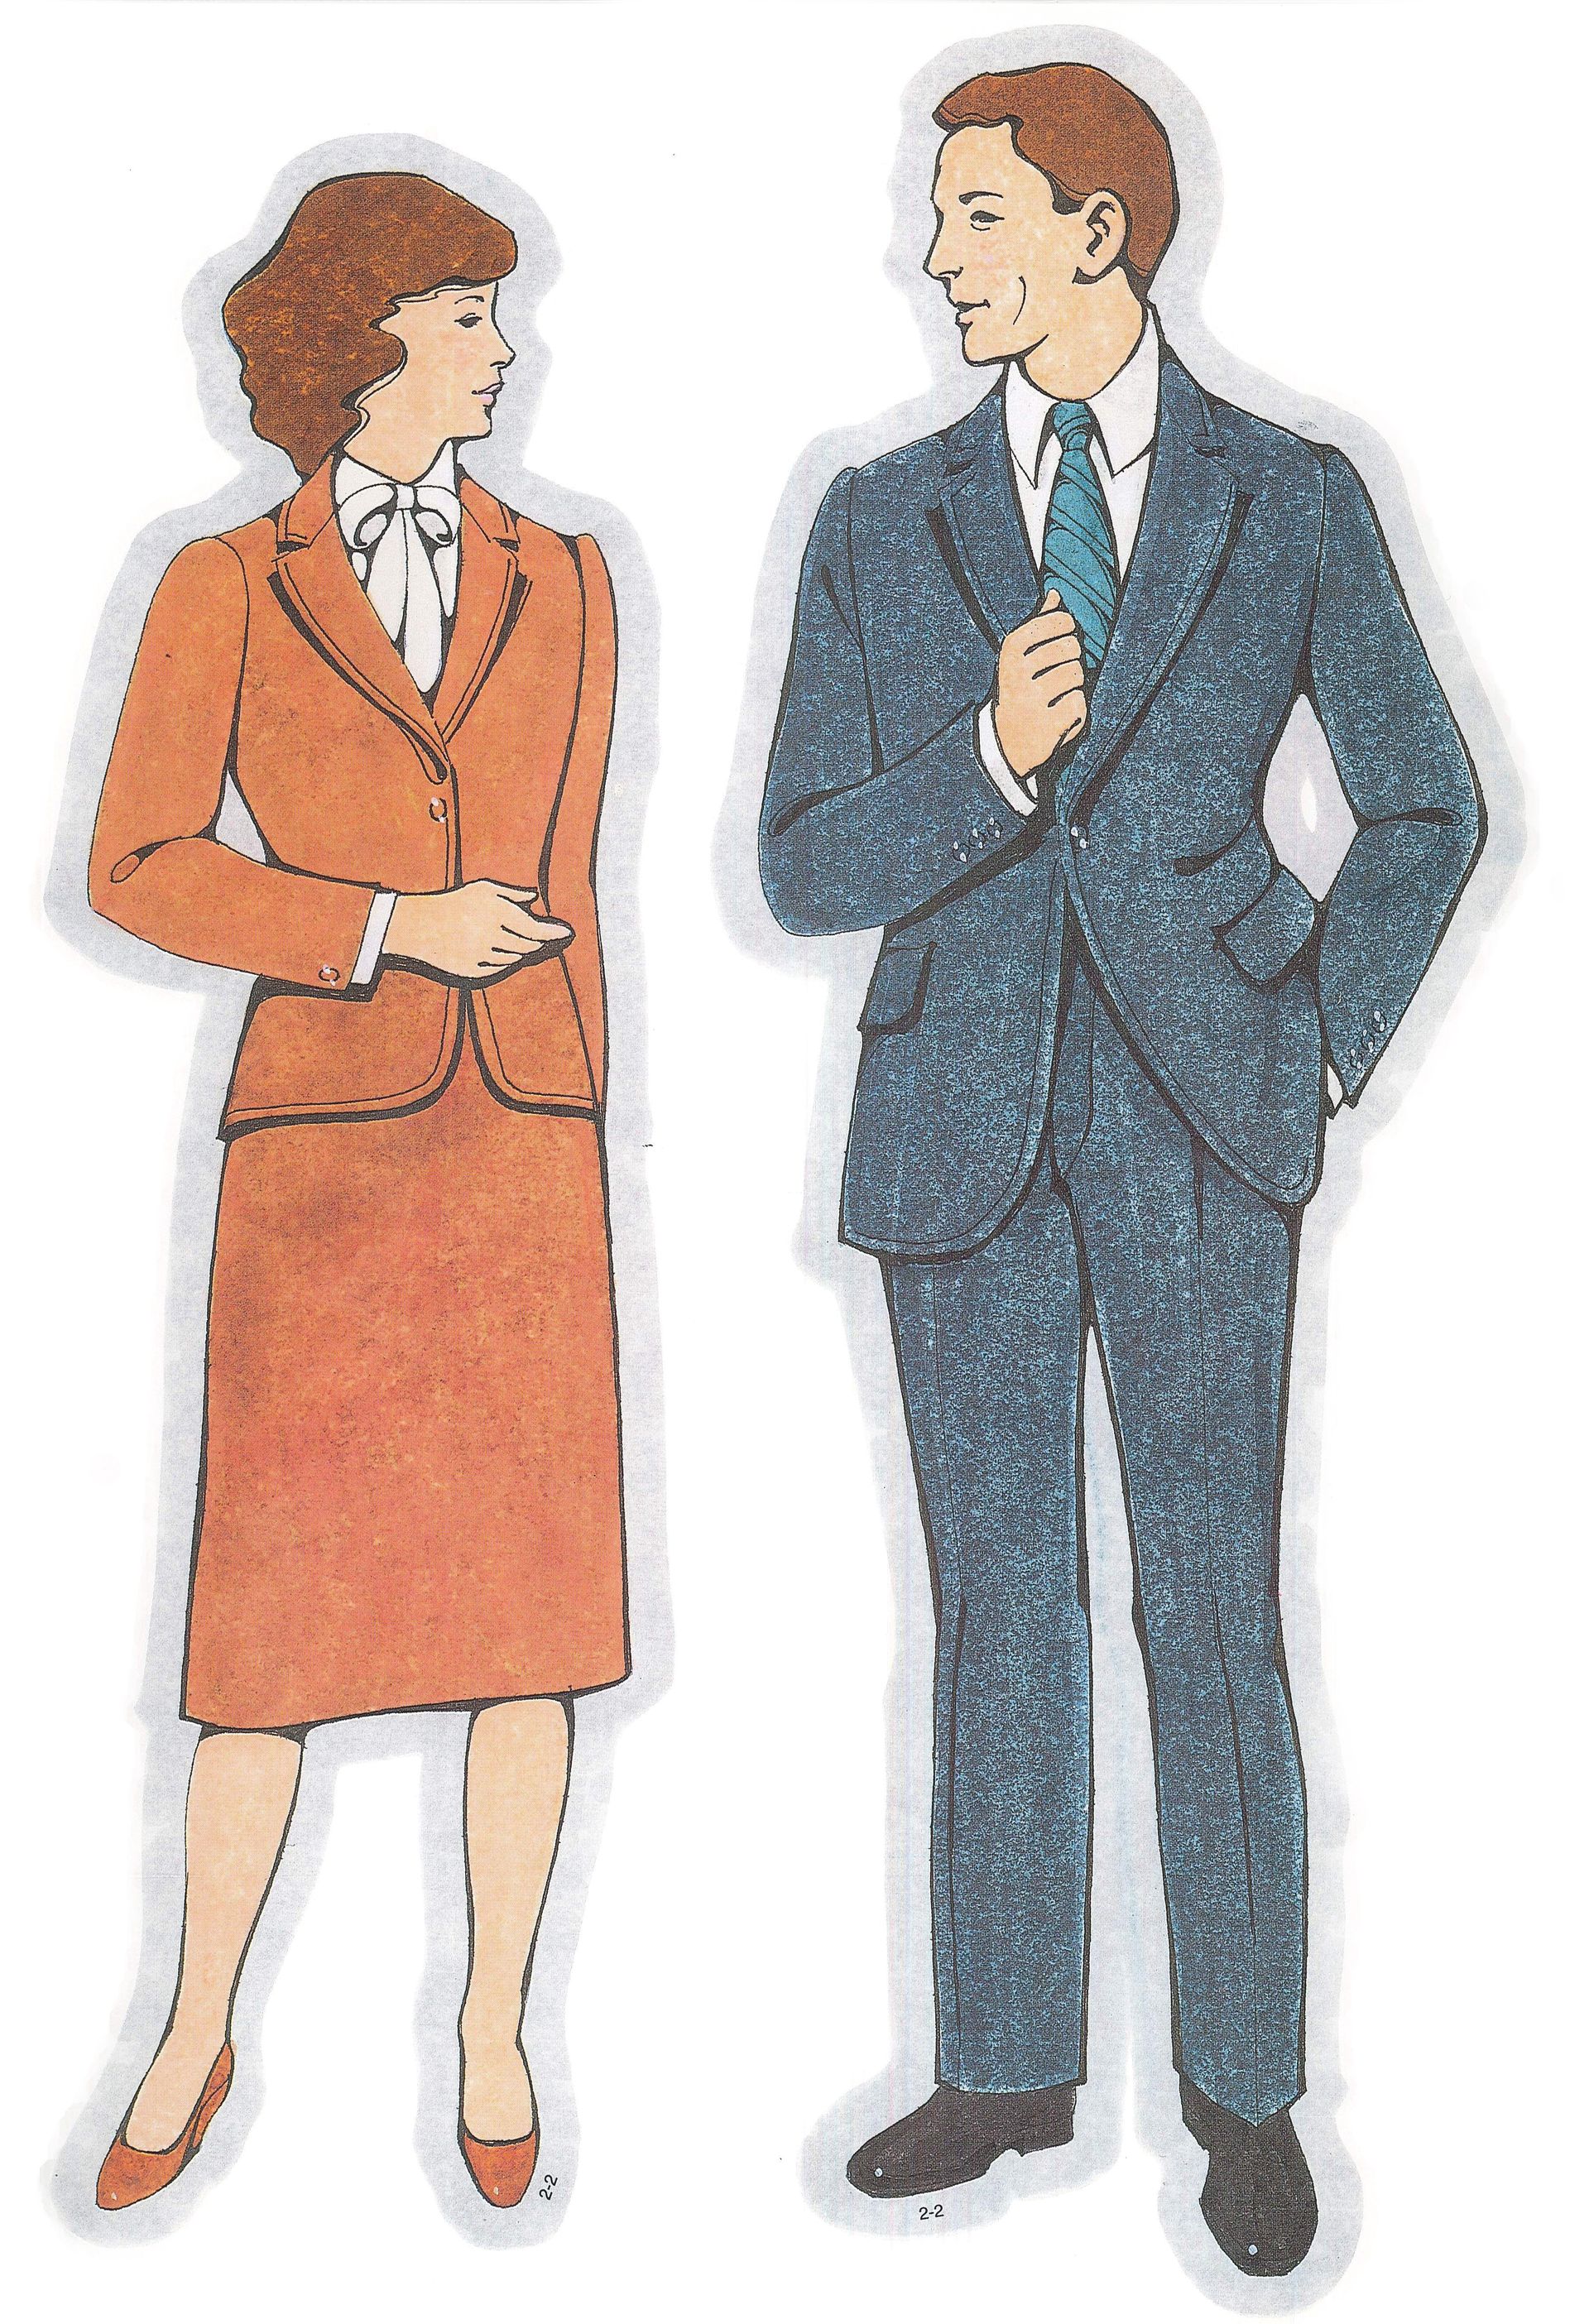 Primary Visual Aids: Cutout 2-2, Mother and Father, Both in Suits.